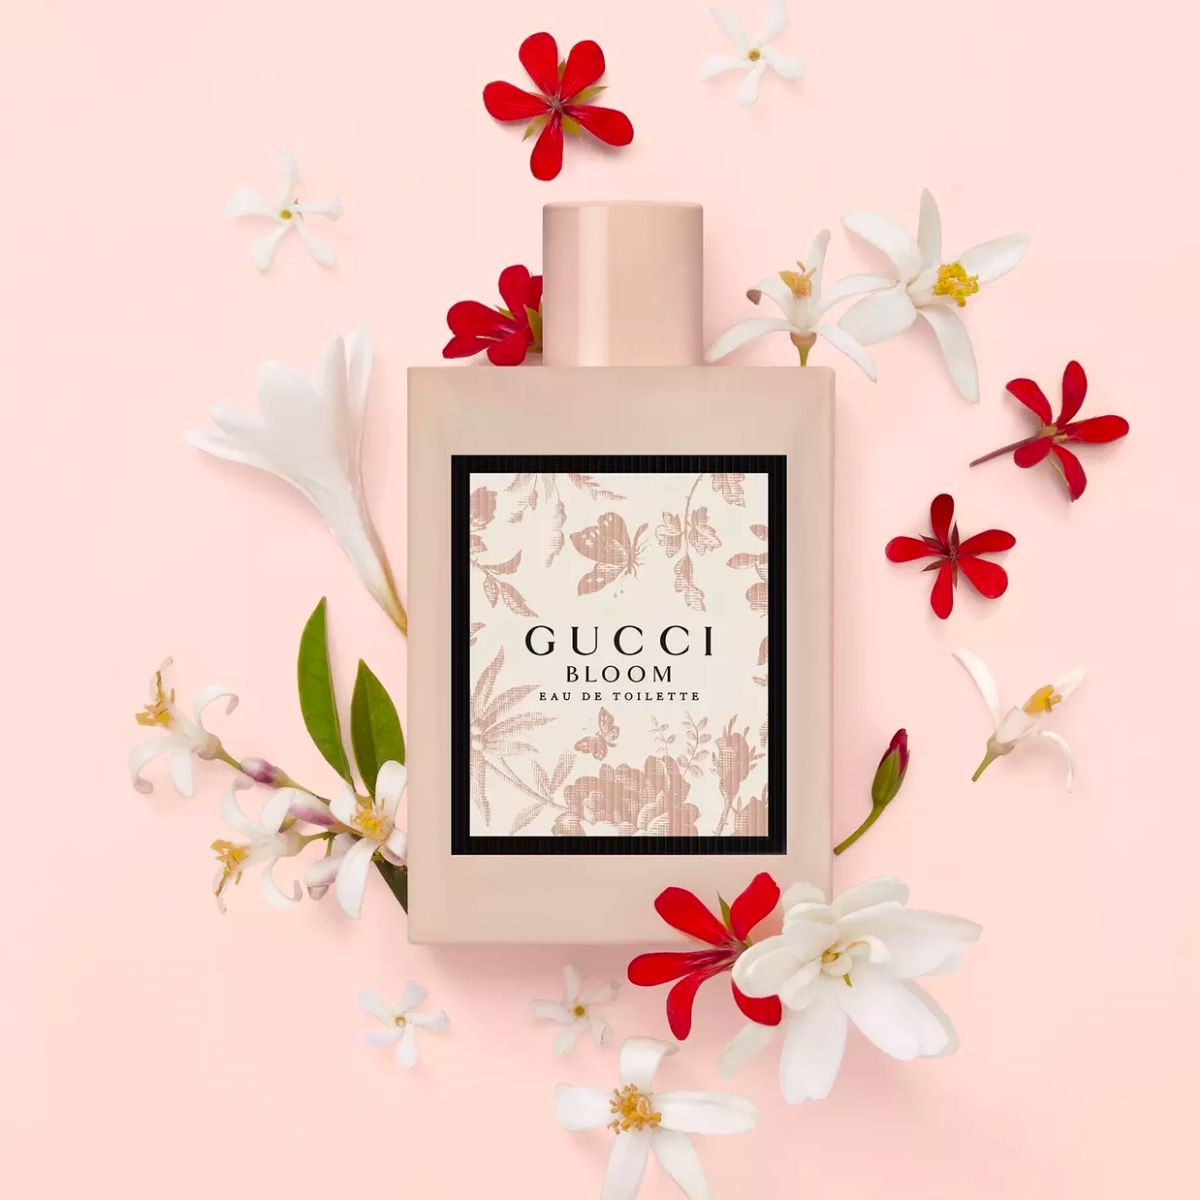 gucci bloom edt bottle surrounded by flowers 